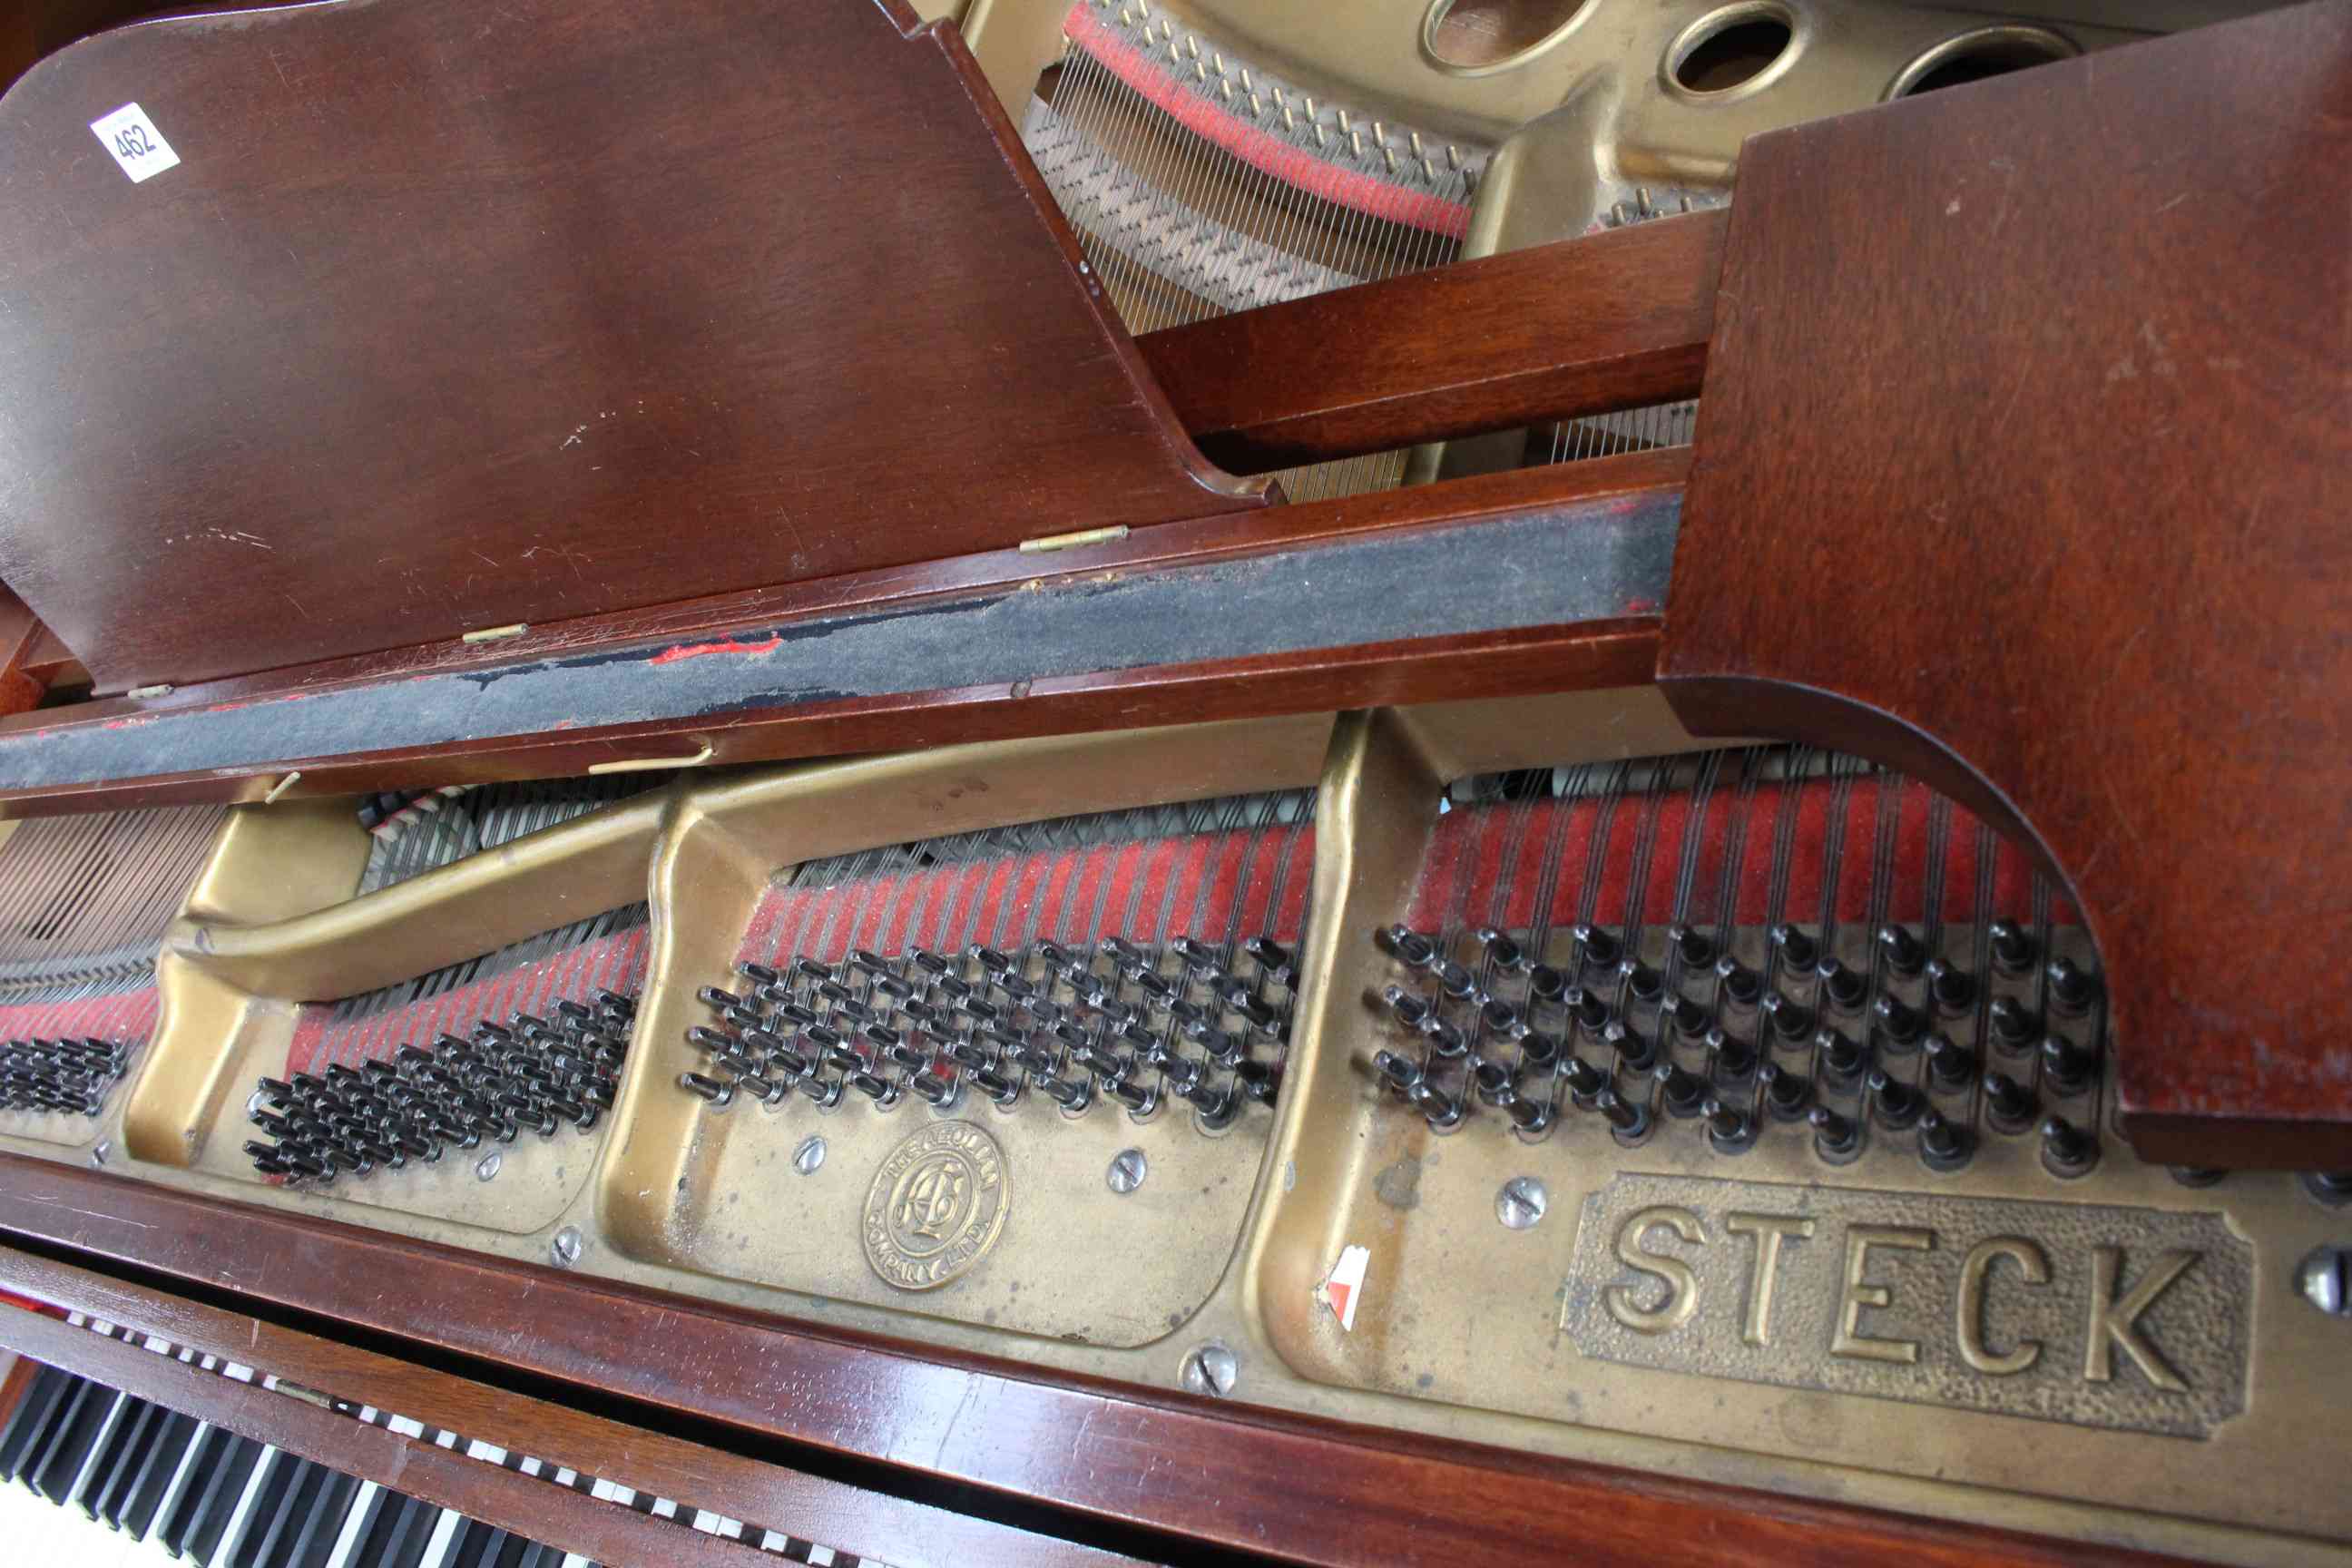 Steck mahogany cased baby grand piano, possible Serial No. 32583. - Image 3 of 3